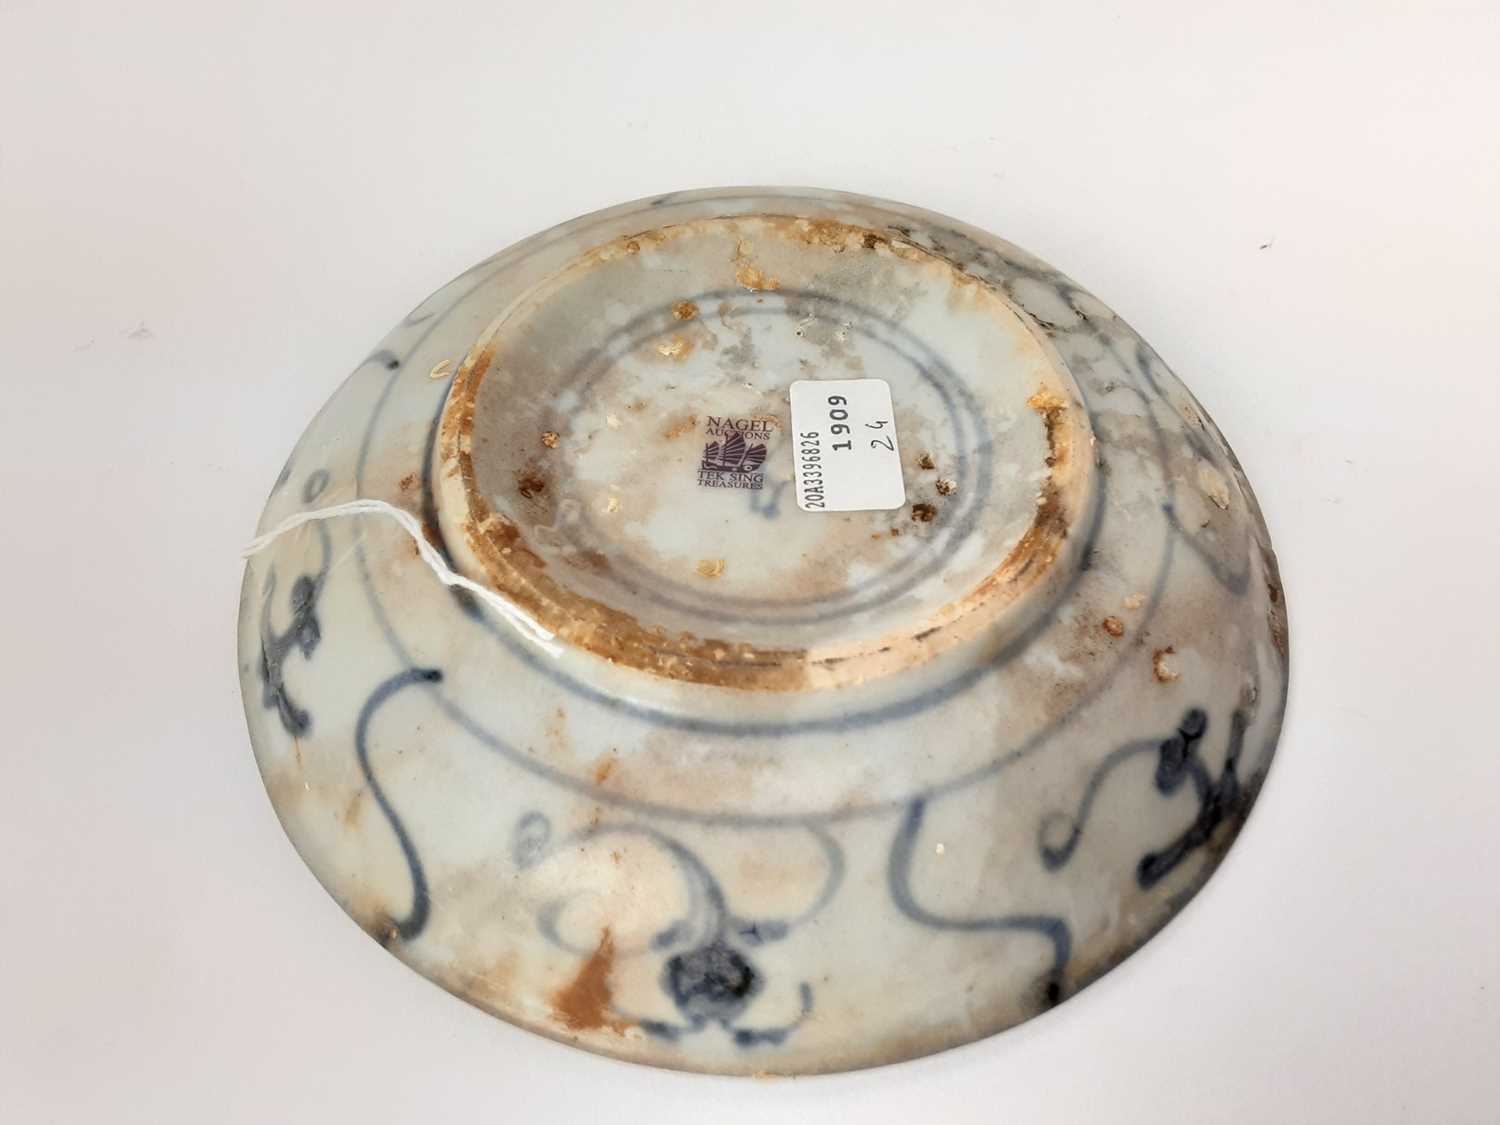 Chinese blue and white export porcelain bowl, late 18th century, painted with landscape scenes... - Image 6 of 6